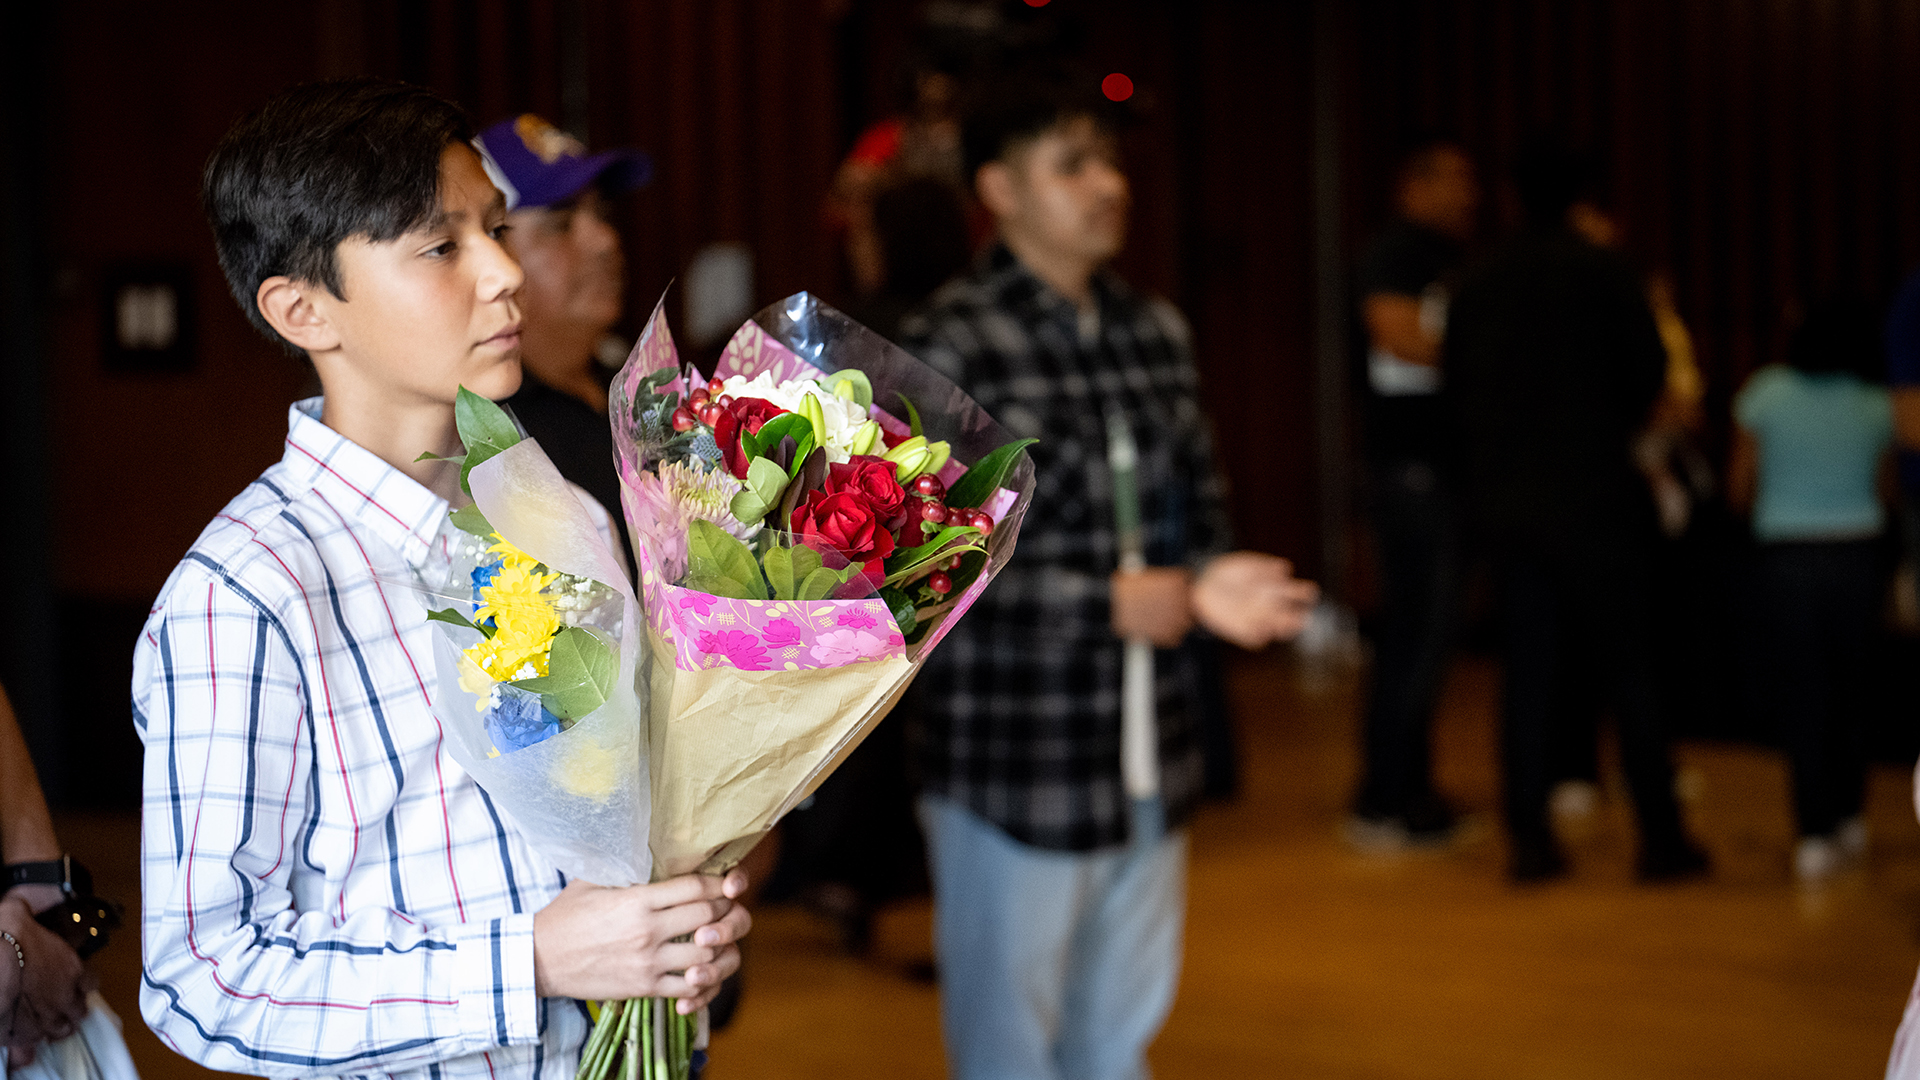 A teenager holds two bouquets of flowers and looks toward someone out of the frame during a graduation ceremony